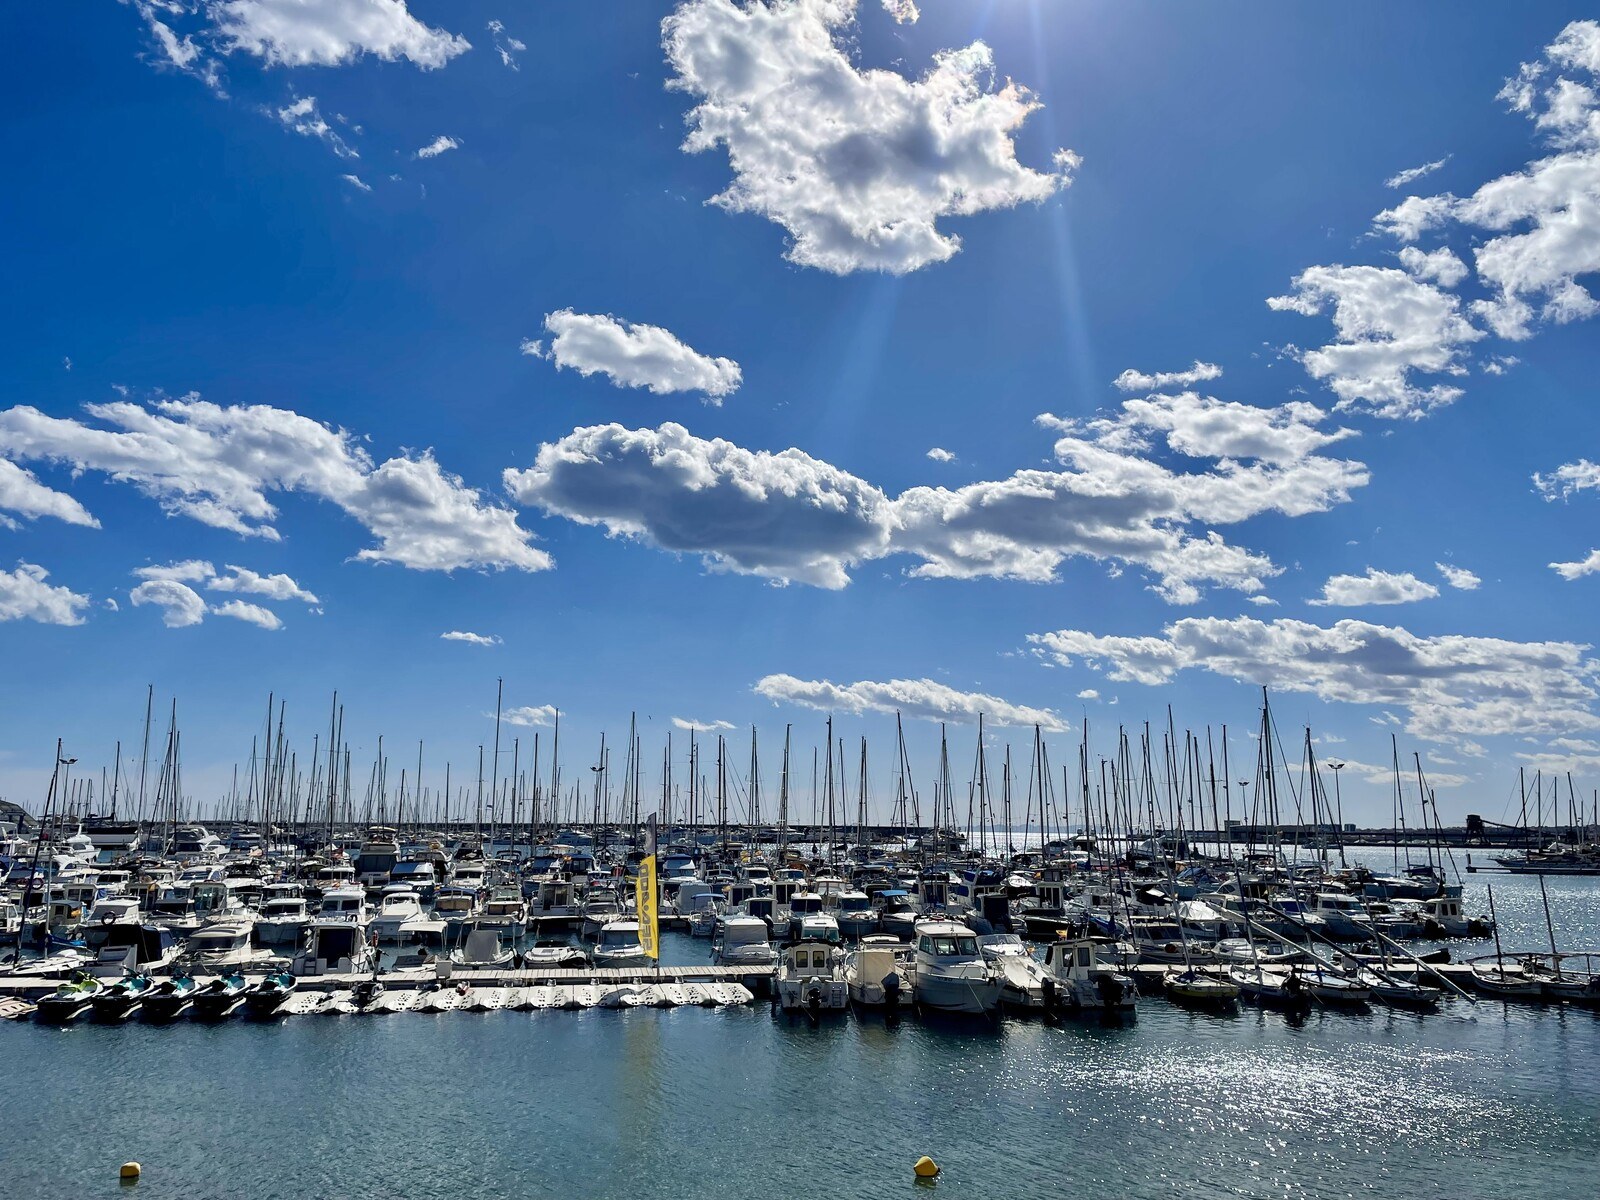 A marina full of sailboats under a lightly clouded sky